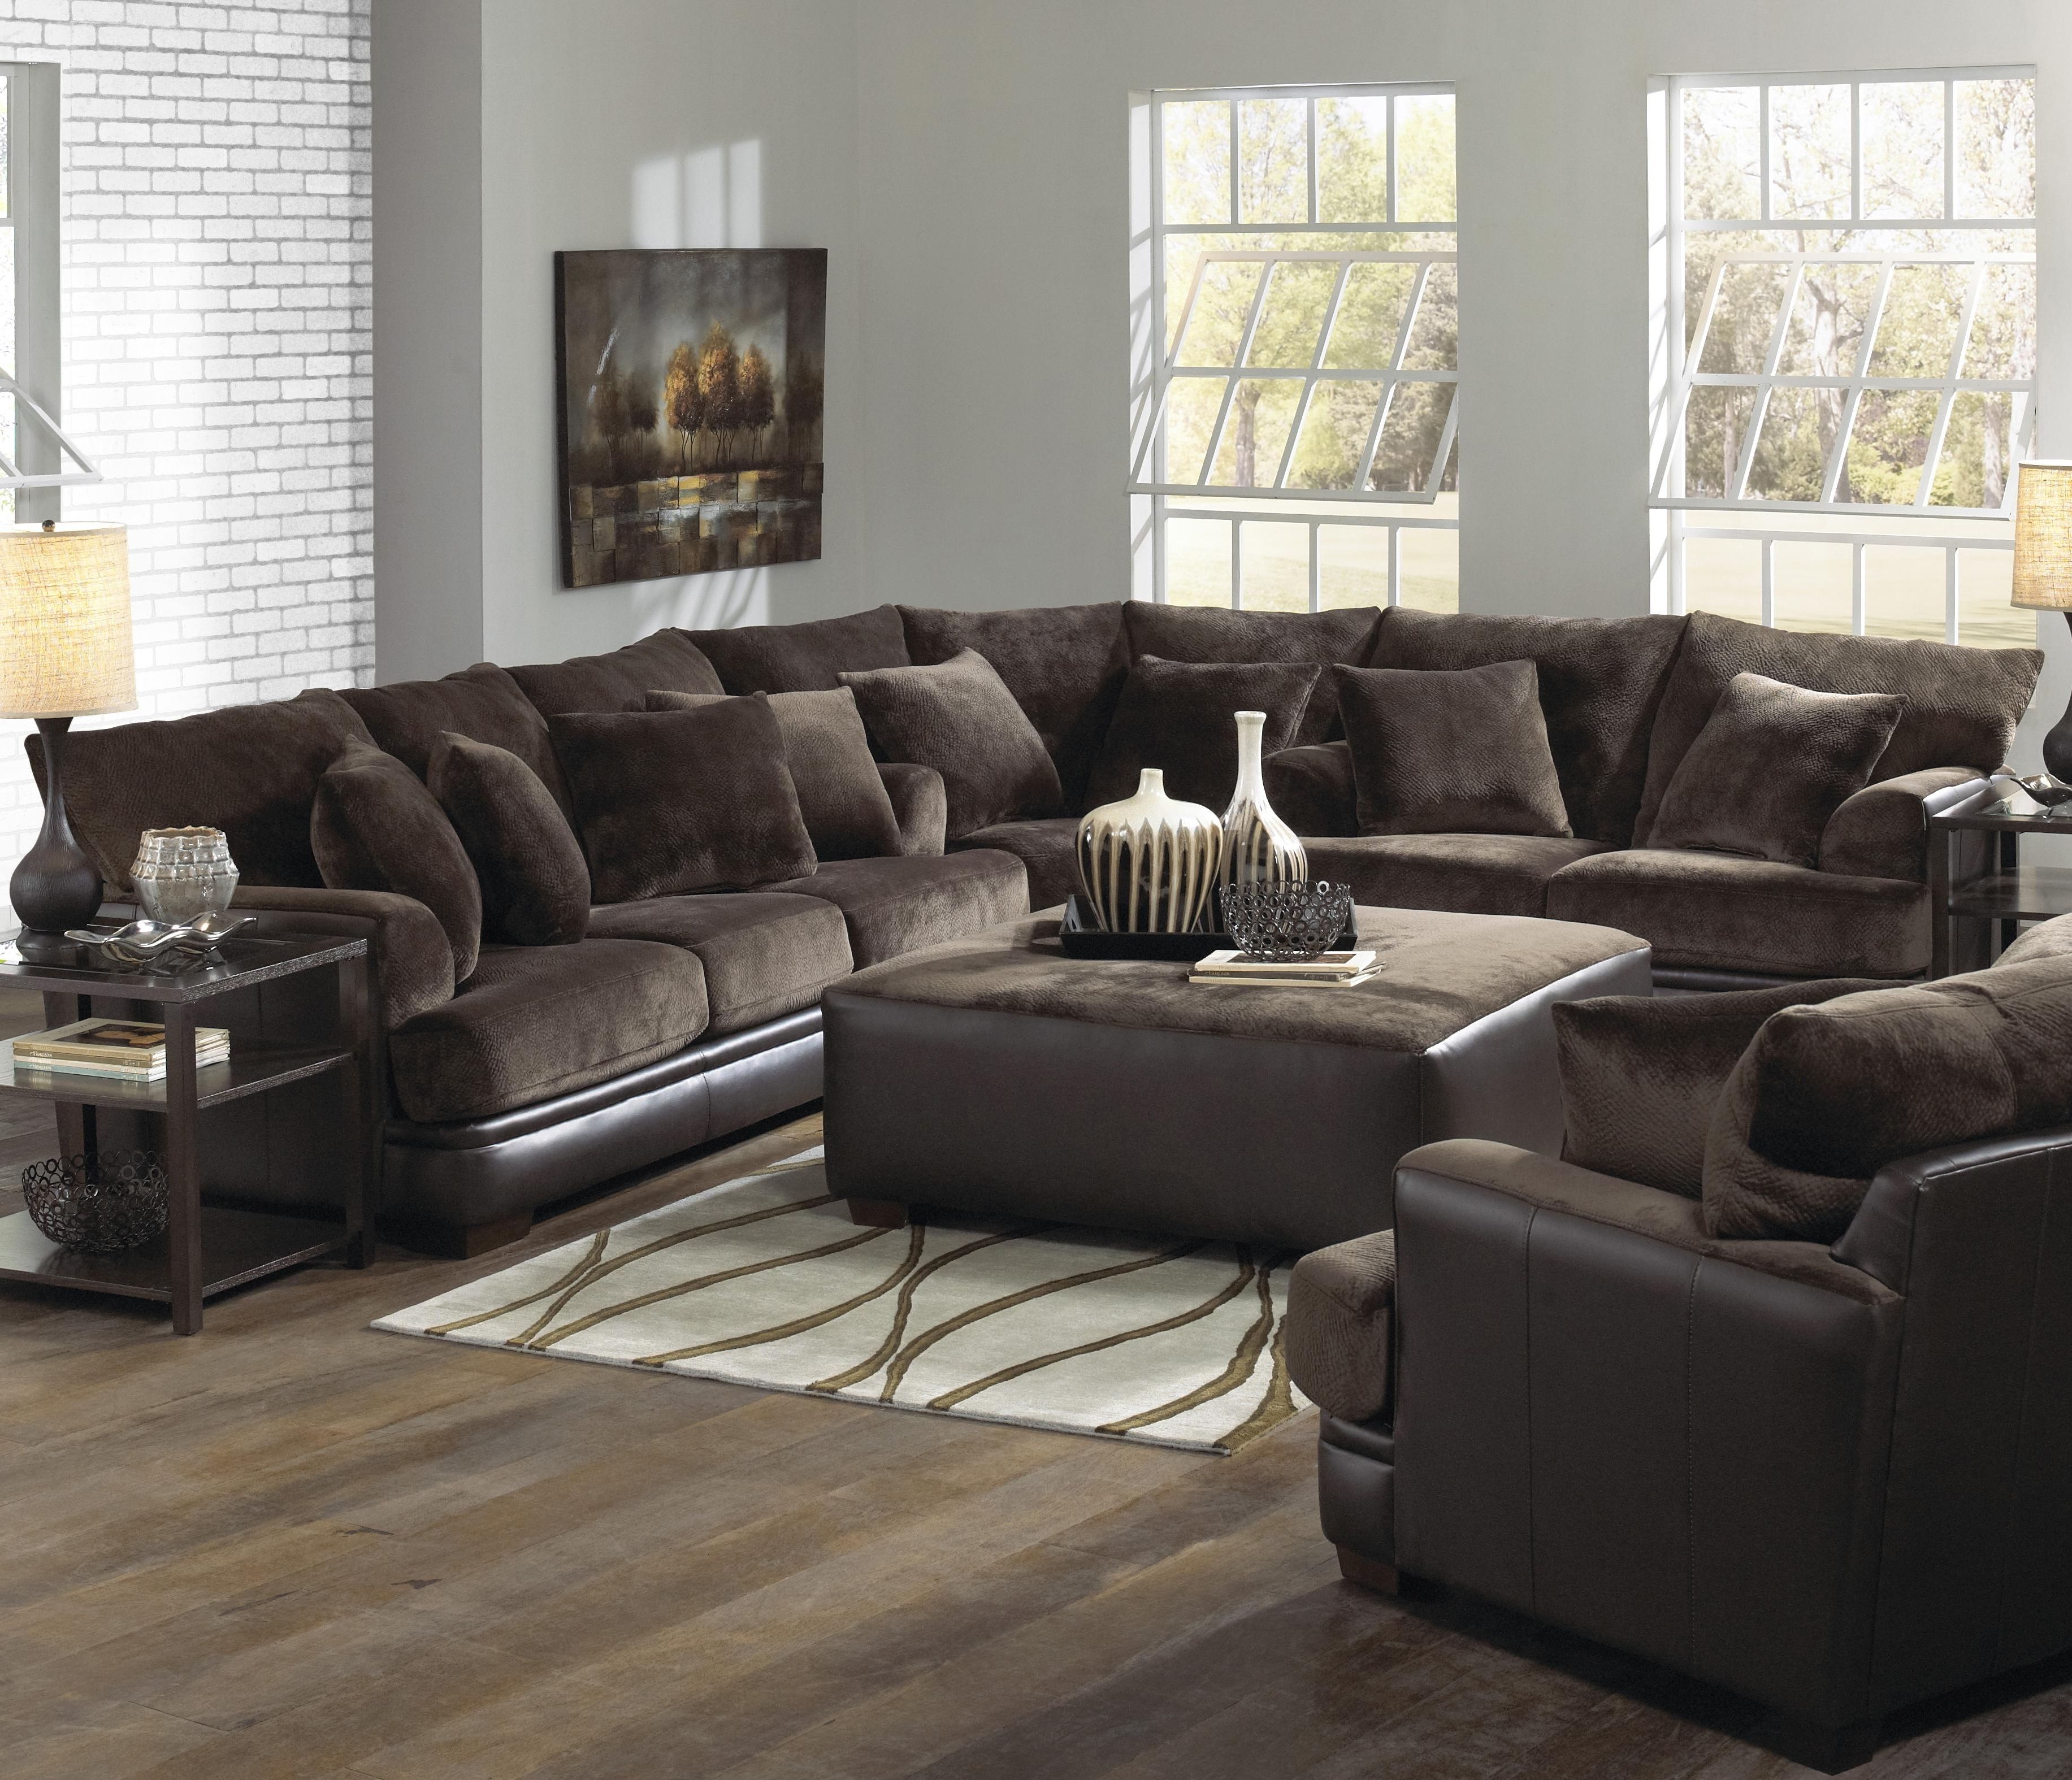 Cheap U Shaped Sectional Sofas – Home Design Ideas And Pictures Throughout Favorite Large U Shaped Sectionals (View 13 of 15)